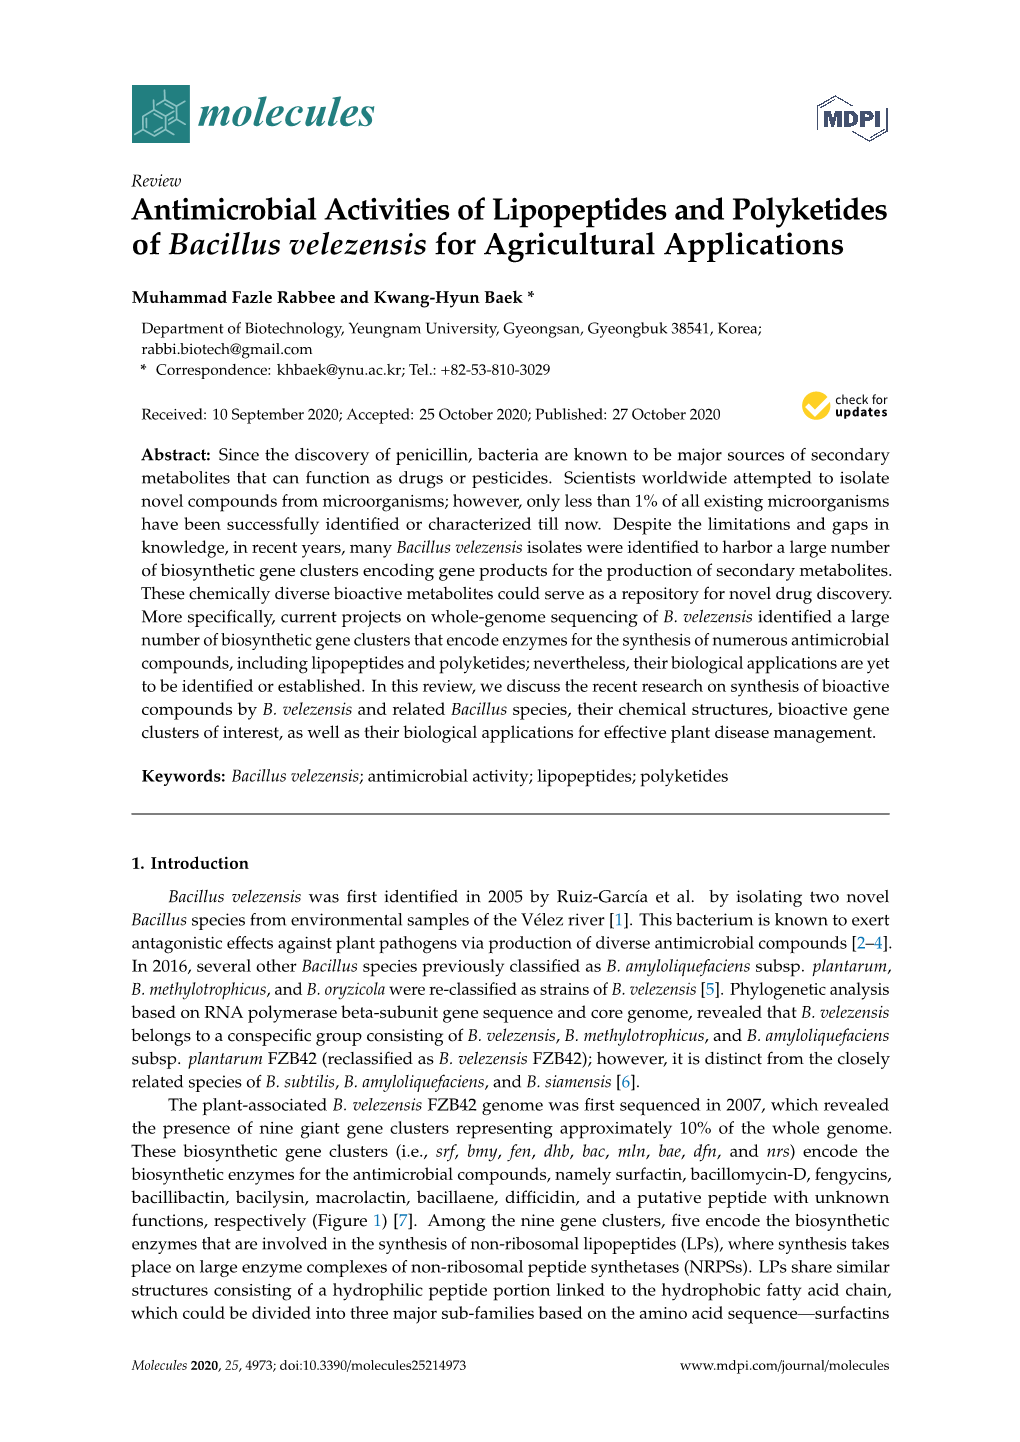 Antimicrobial Activities of Lipopeptides and Polyketides of Bacillus Velezensis for Agricultural Applications